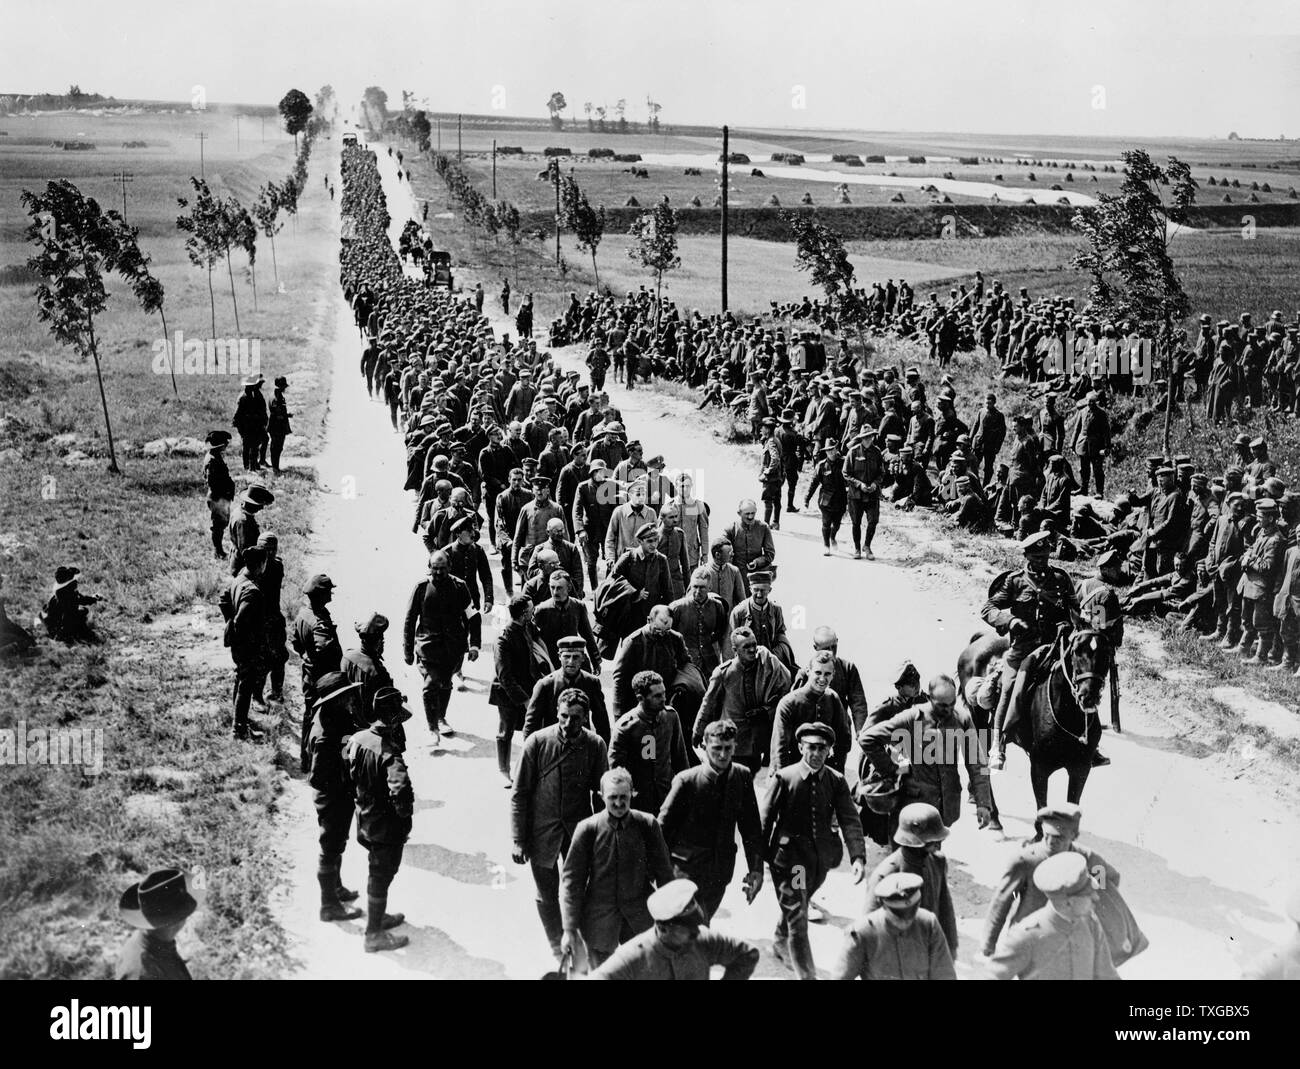 Official photograph taken on the British Western Front in France. German prisoners in batches of 1,000 arriving at a prisoners of war cage. Photograph shows a long line of German soldiers, prisoners of war, walking along roadway, somewhere in France. Stock Photo